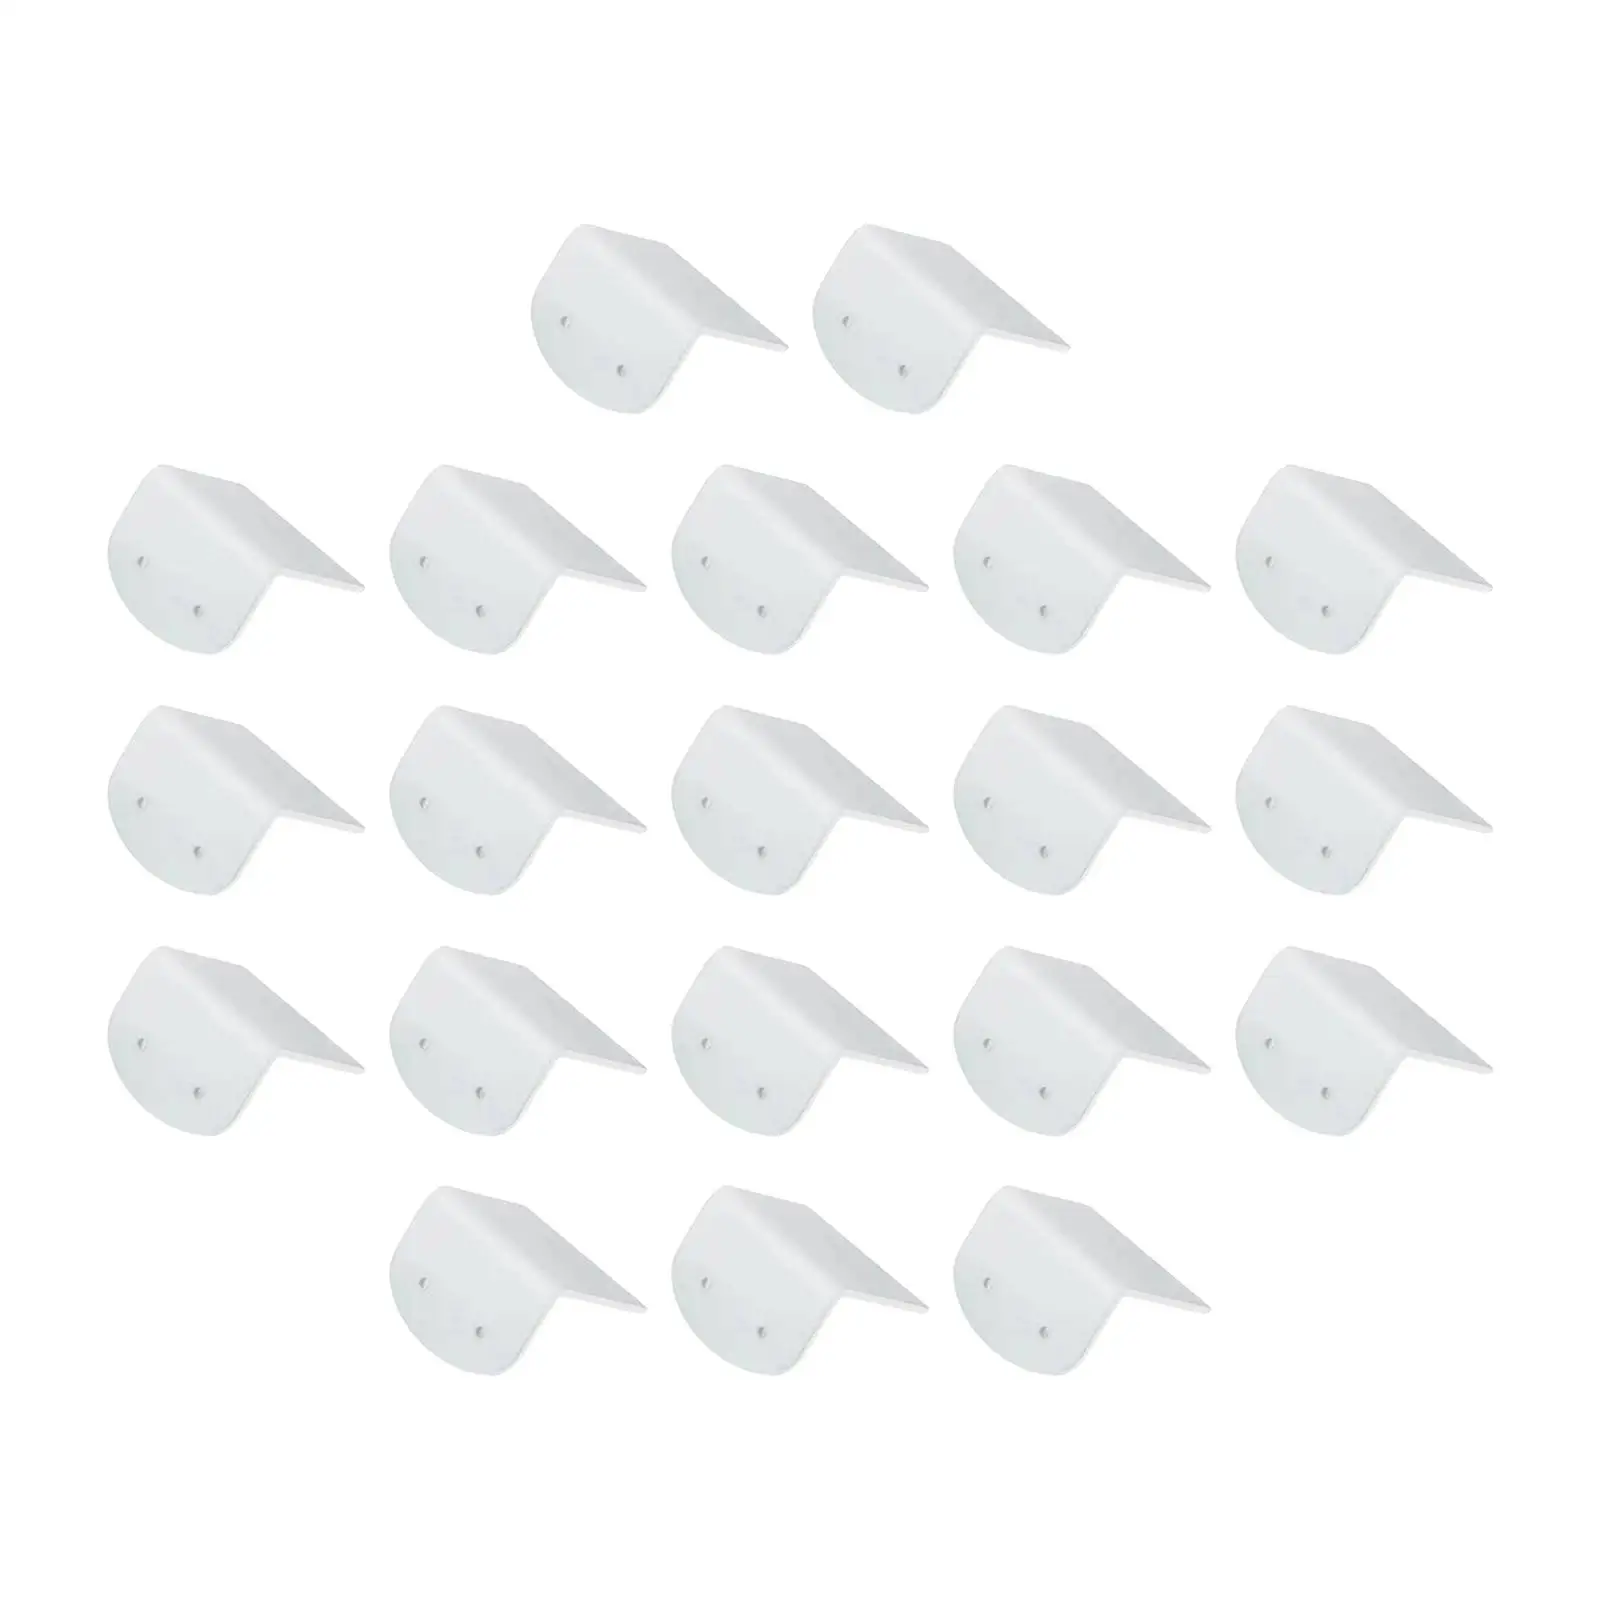 20 Pieces Acrylic Earring Display Cards White Accessory Durable Lightweight Portable for DIY Crafts Showcase Retail store